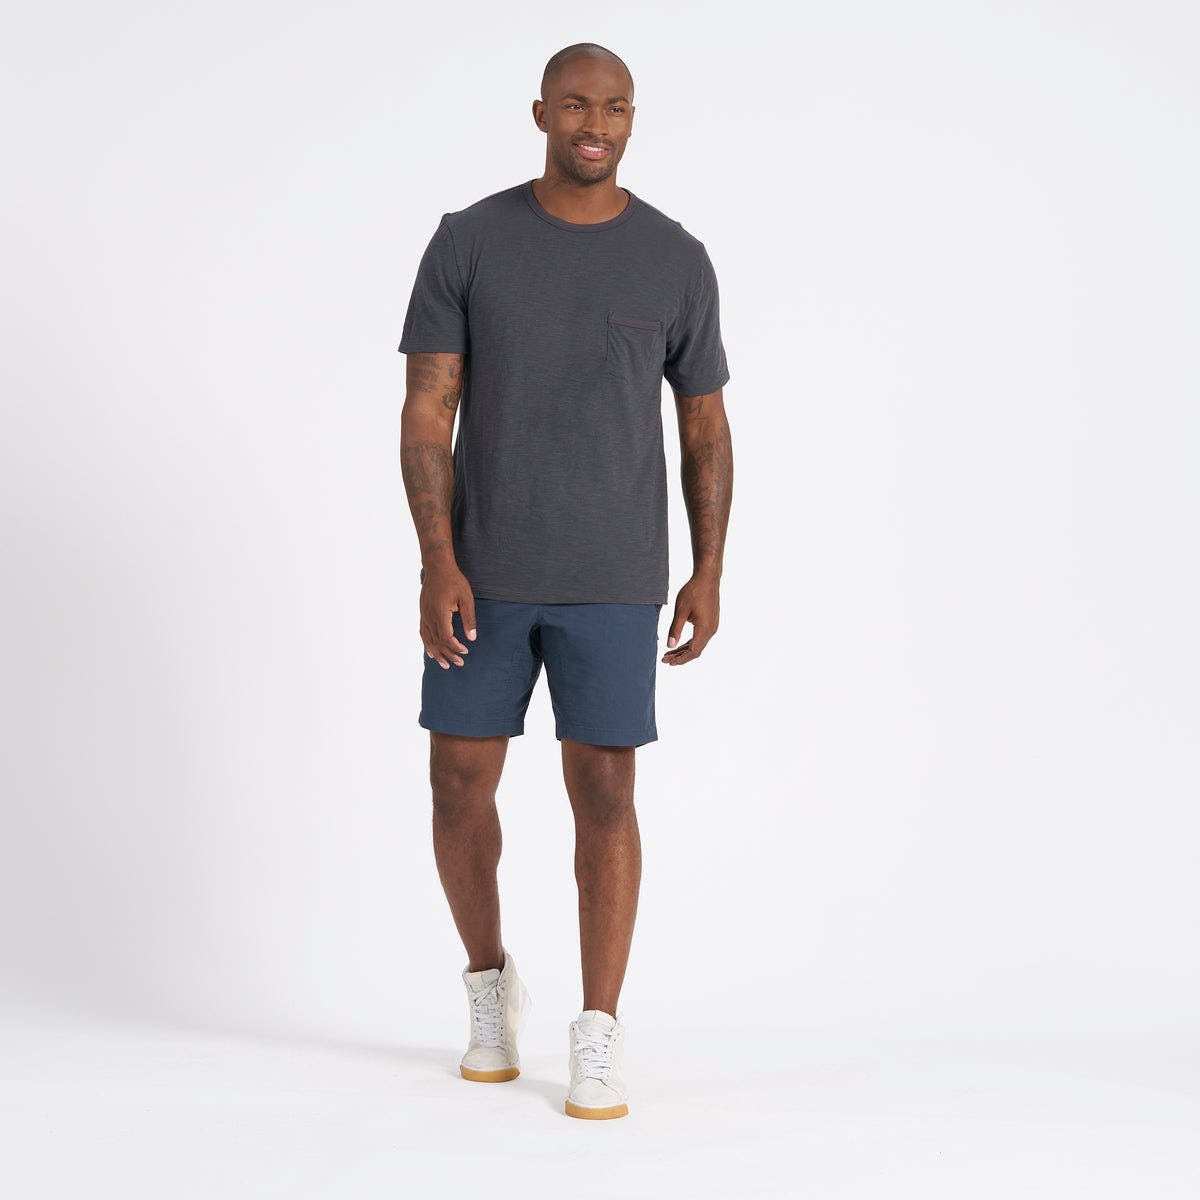 The Rise Tee Charcoal